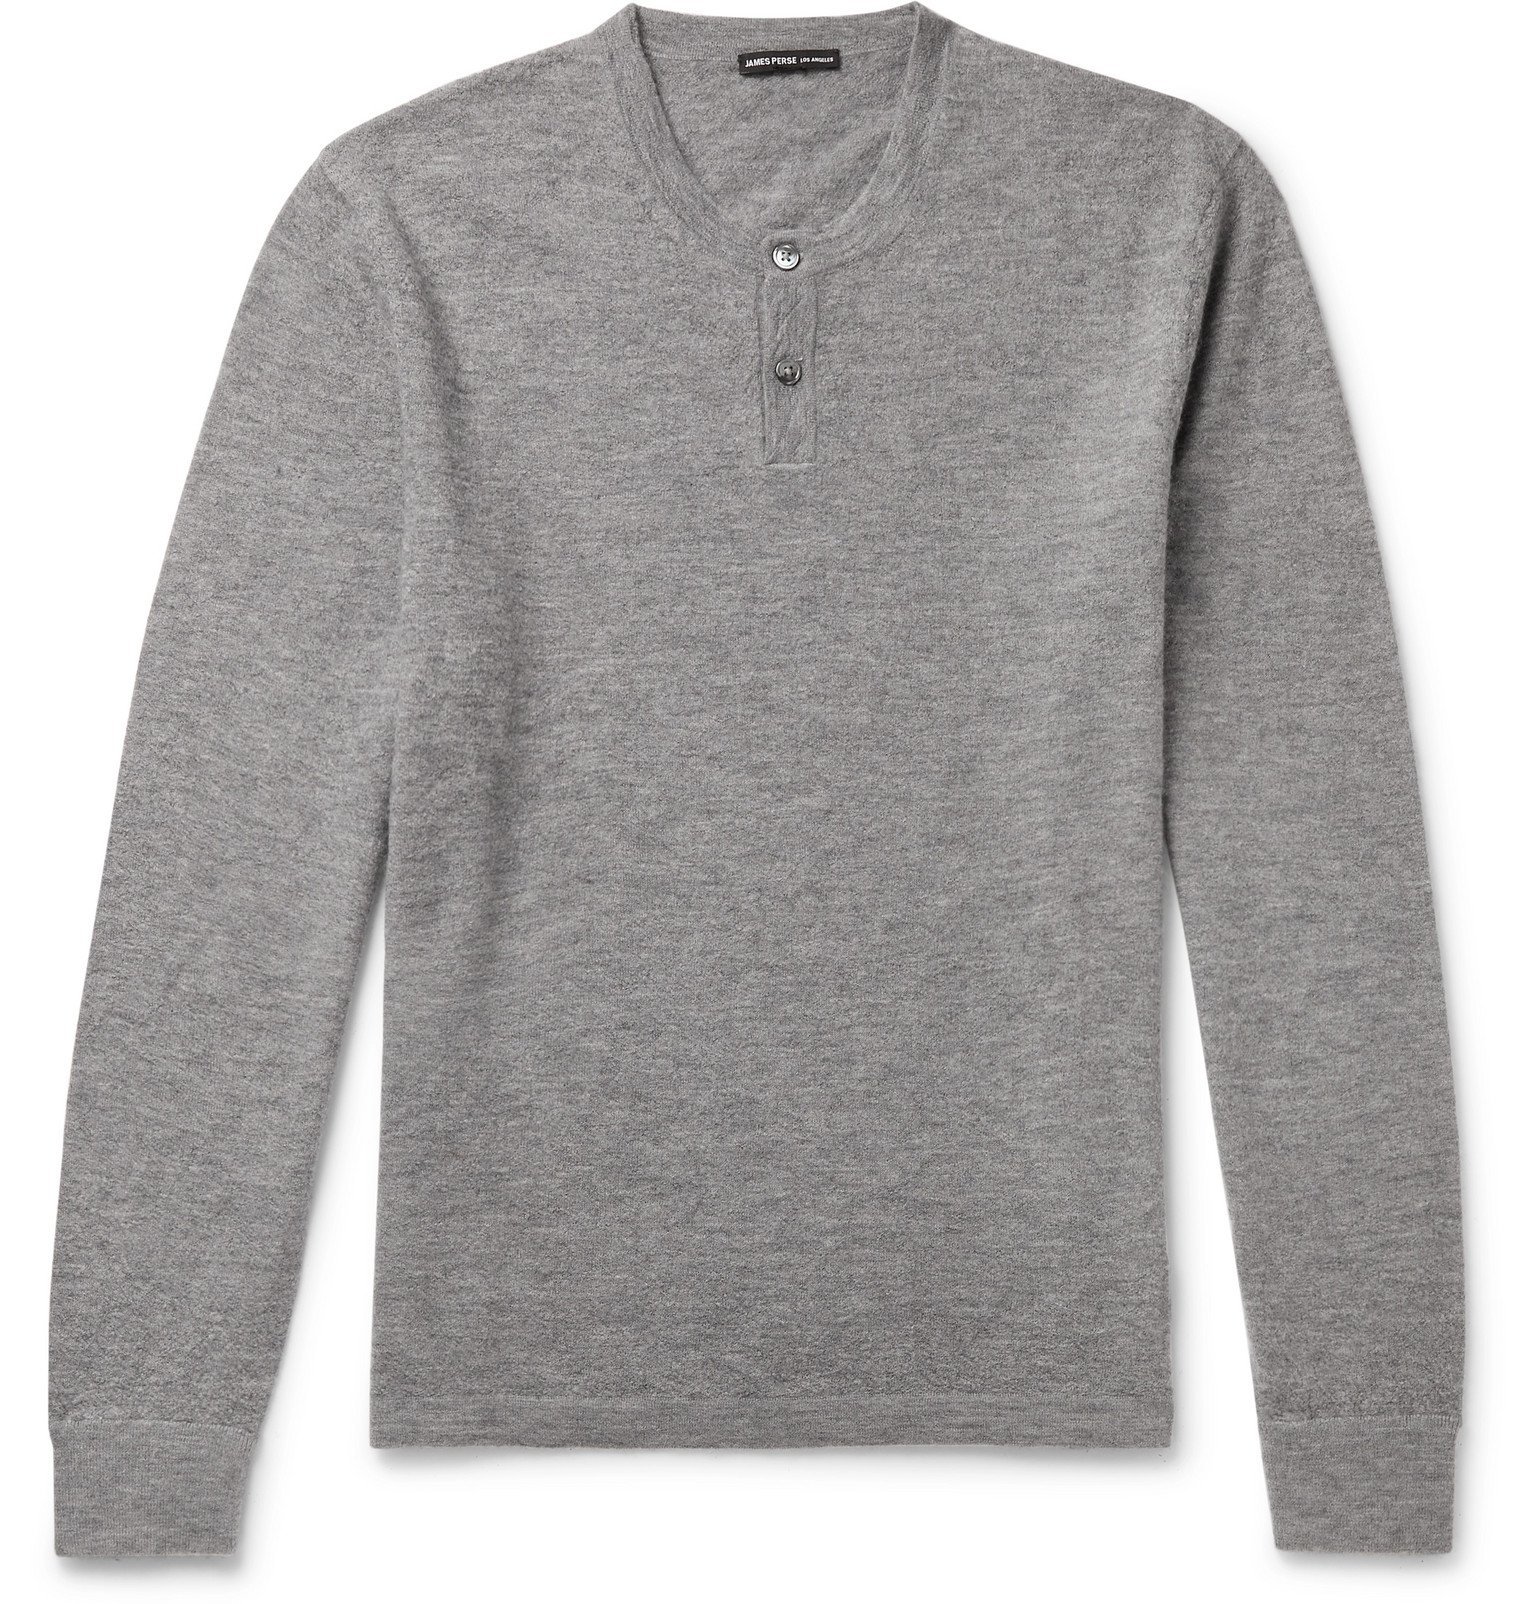 James Perse - Mélange Cashmere Henley Sweater - Gray James Perse